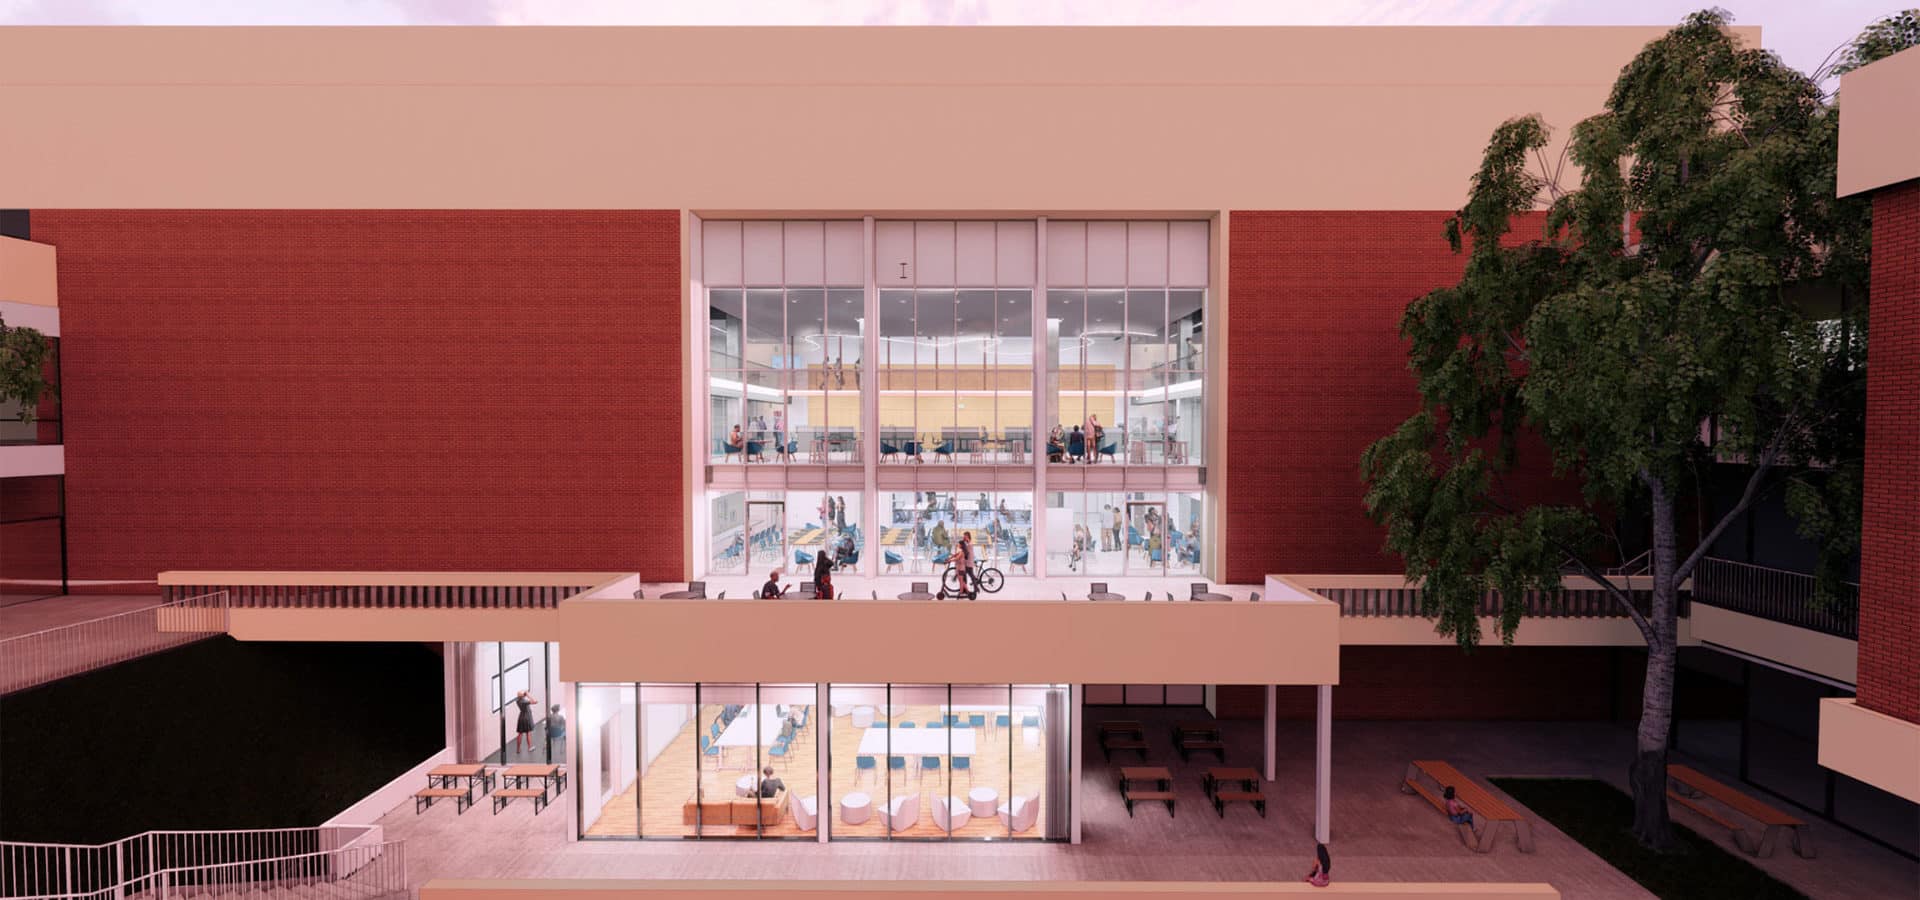 Rendering of studio block with large windows and modern stations and furnishings